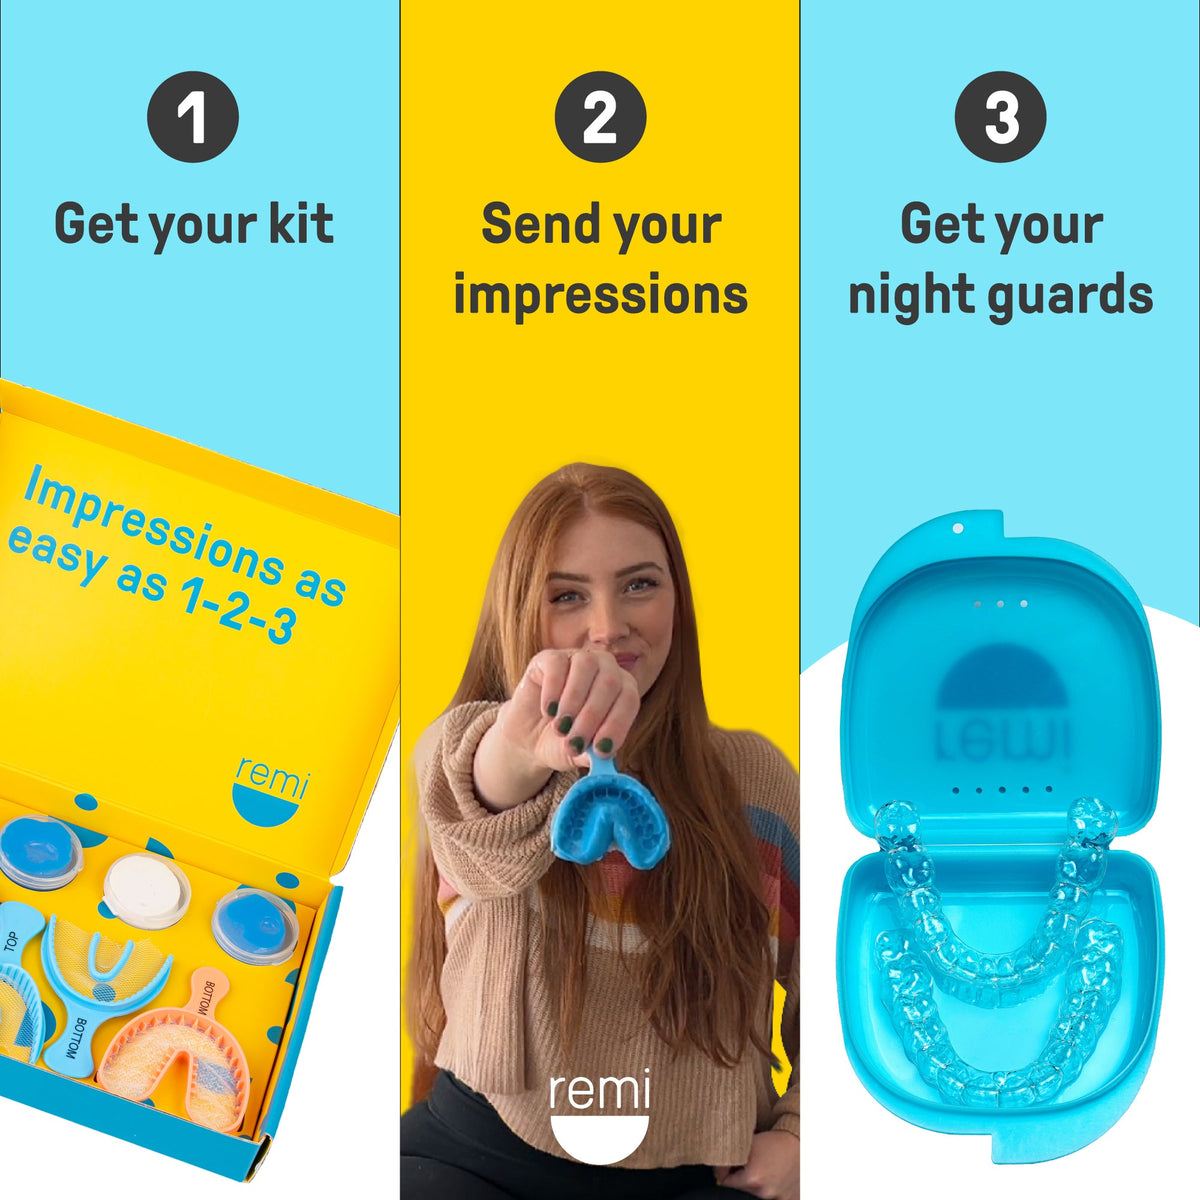 Woman showing a dental impression kit with steps 1 and 3 displayed in the background: 1 - &quot;get your Custom Night Guards,&quot; 3 - &quot;get your dental-grade quality night guards.